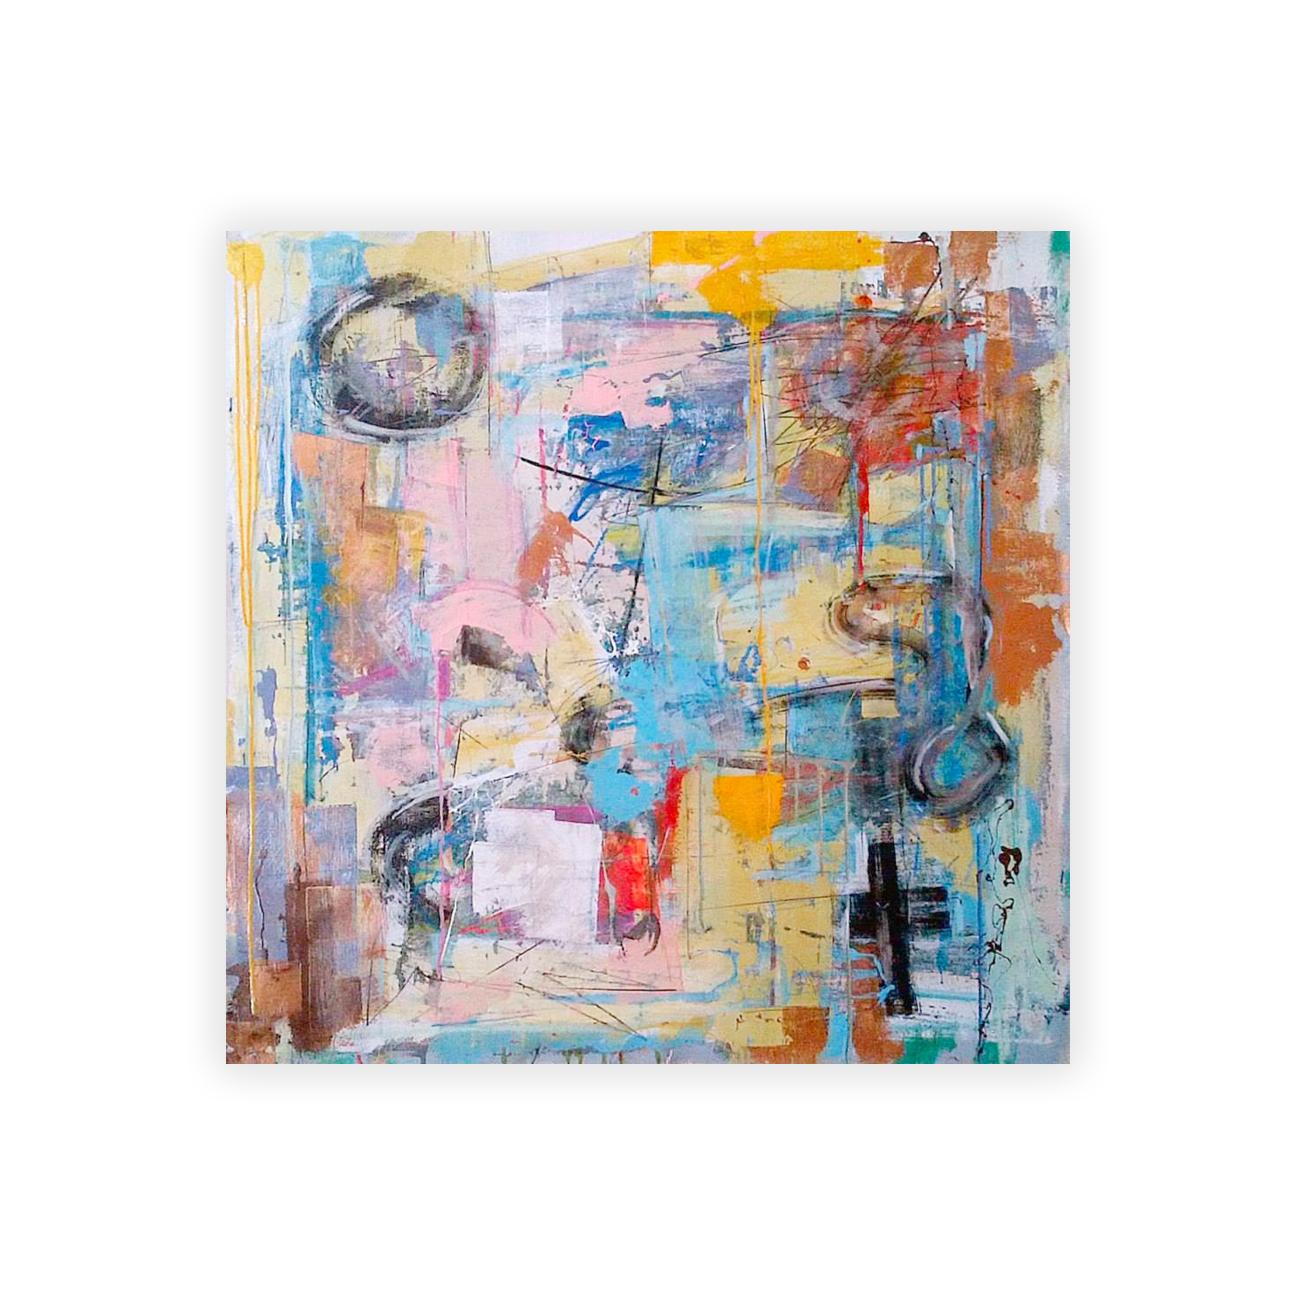 Day Laborer by Joseph Conrad-Ferm, 2014
Mix Medium on Canvas
32" X 32" X 1.25"
81.28cm x 81.28cm x 3.175cm

Mixed media abstract painting on canvas by NY-based artist Joseph Conrad-Ferm.

Shipping is not included. See our shipping policies. Please